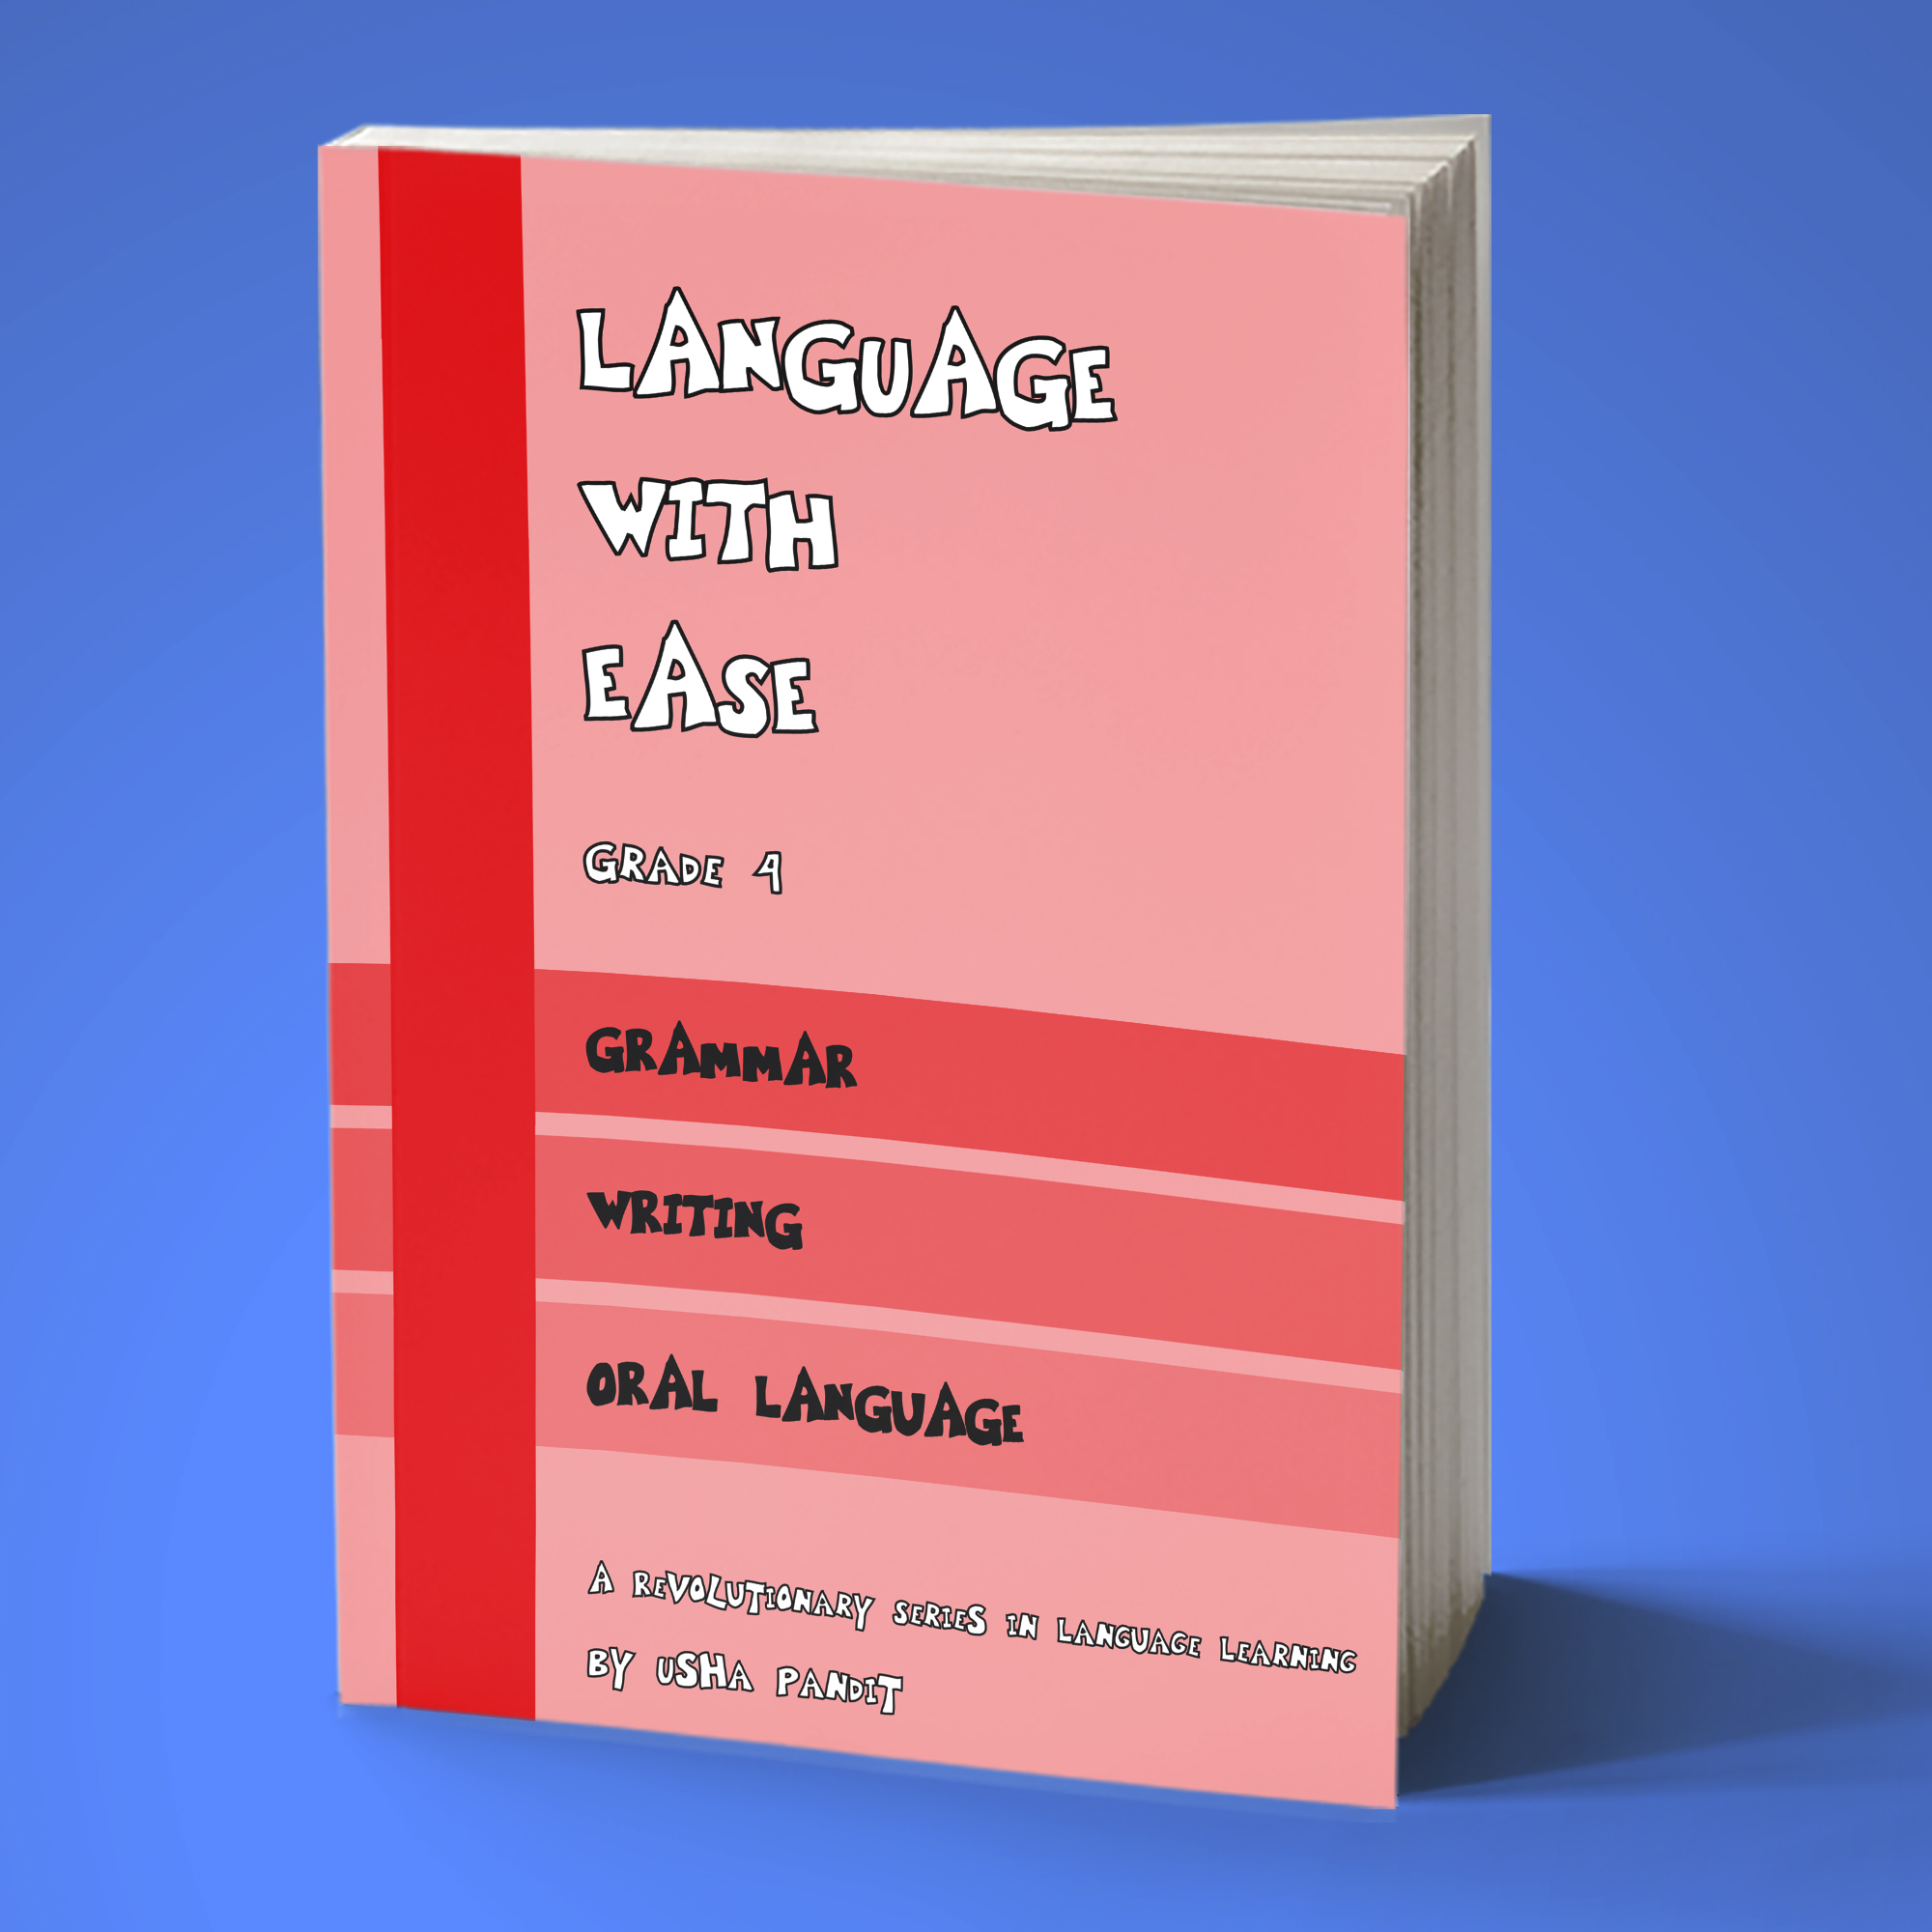 Class　Book　Publishing　Ease　Language　Language　English　Mindsprings　With　LLP　Grade　Learning